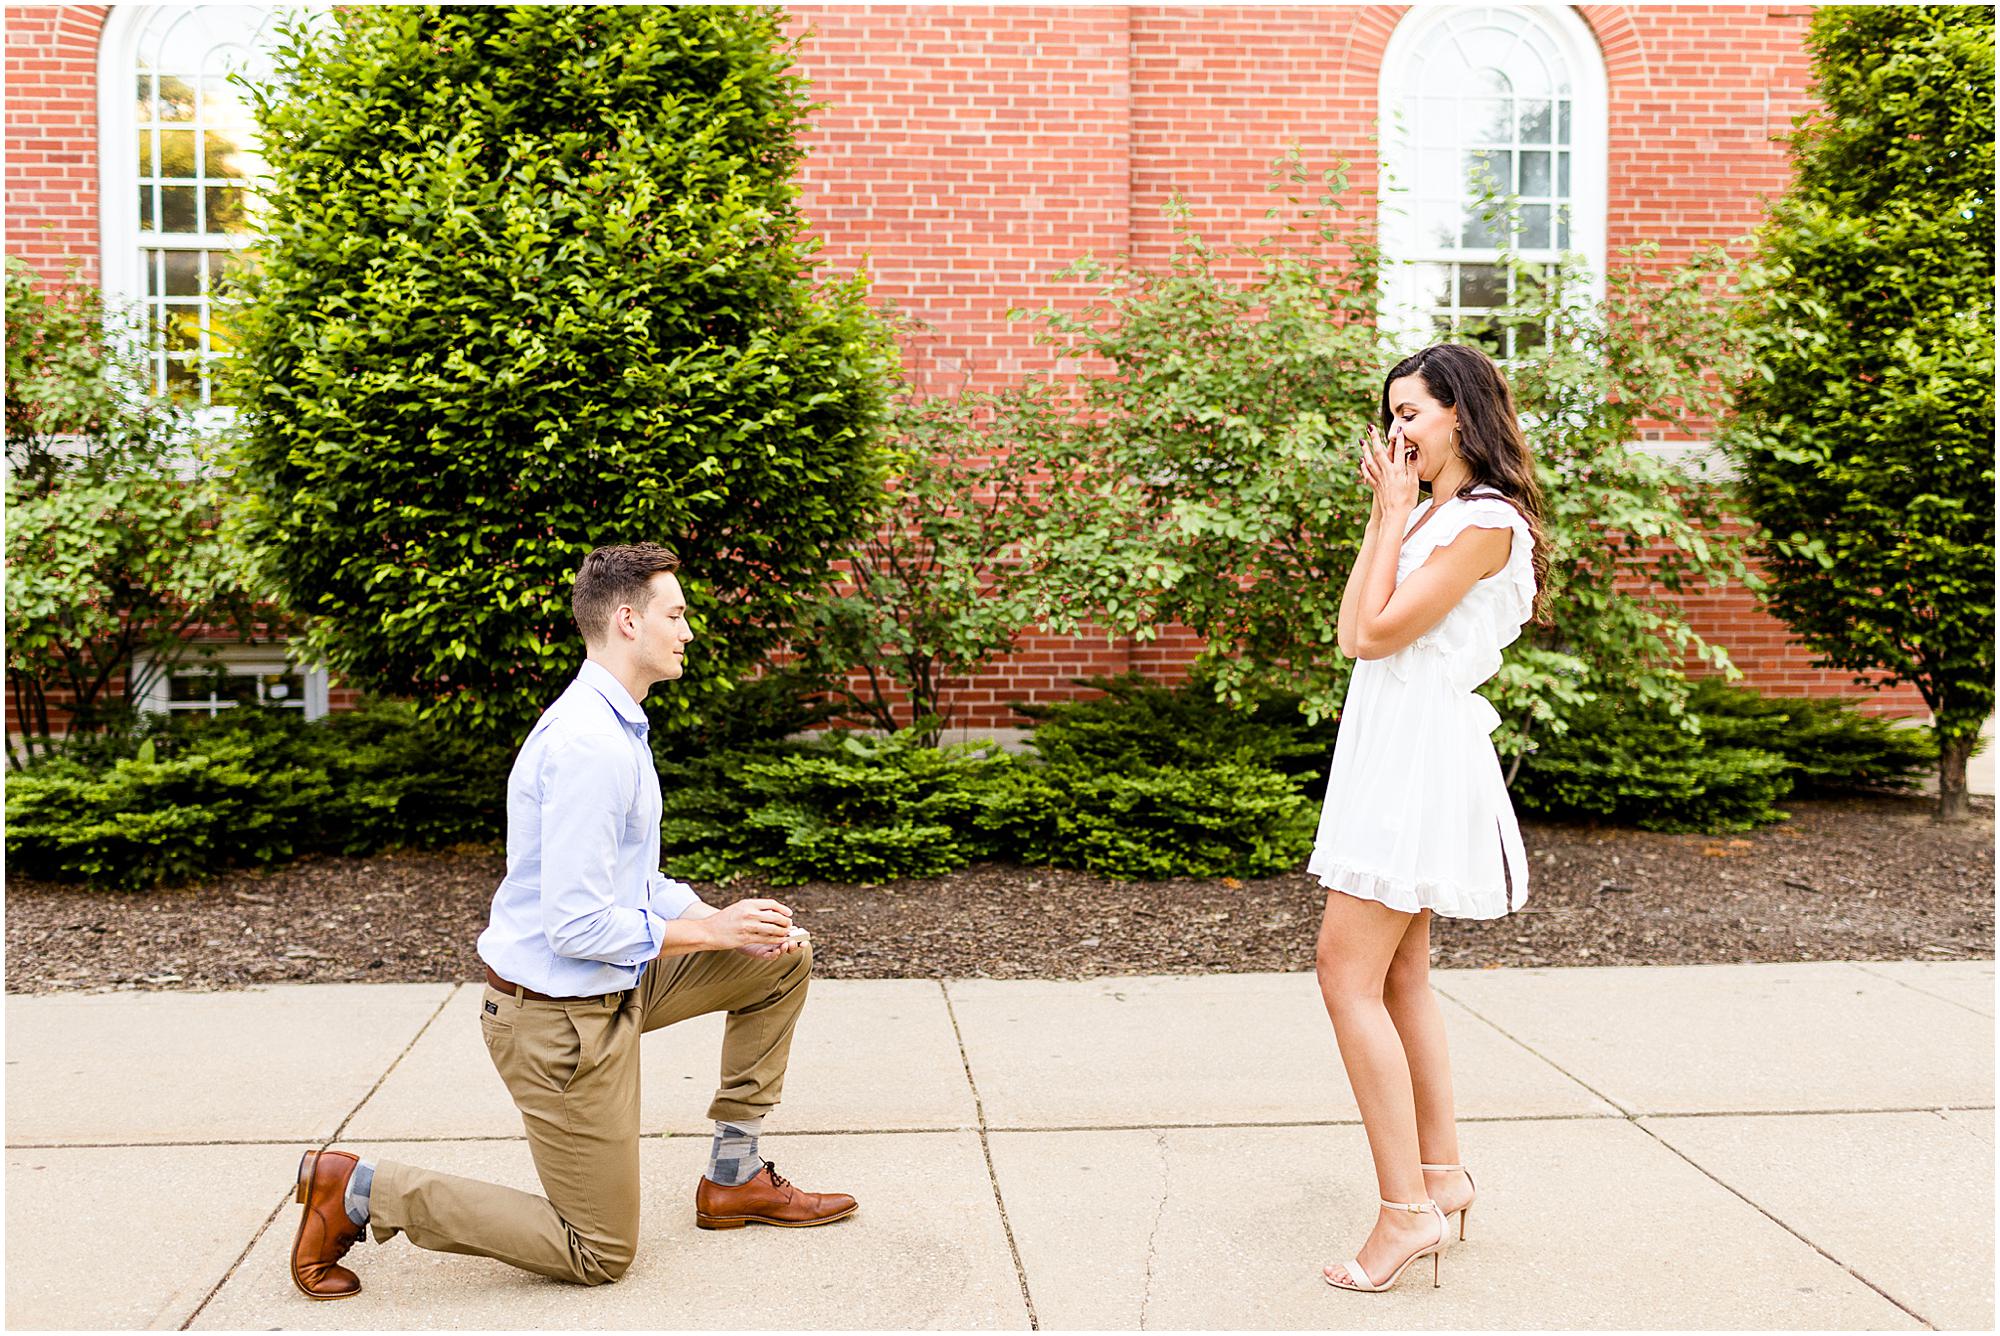 Caitlin-and-Luke-Photography-Illinois-State-University-Proposal-Photos-Normal-IL-engagement-session-Illinois-State-proposal_1069.jpg